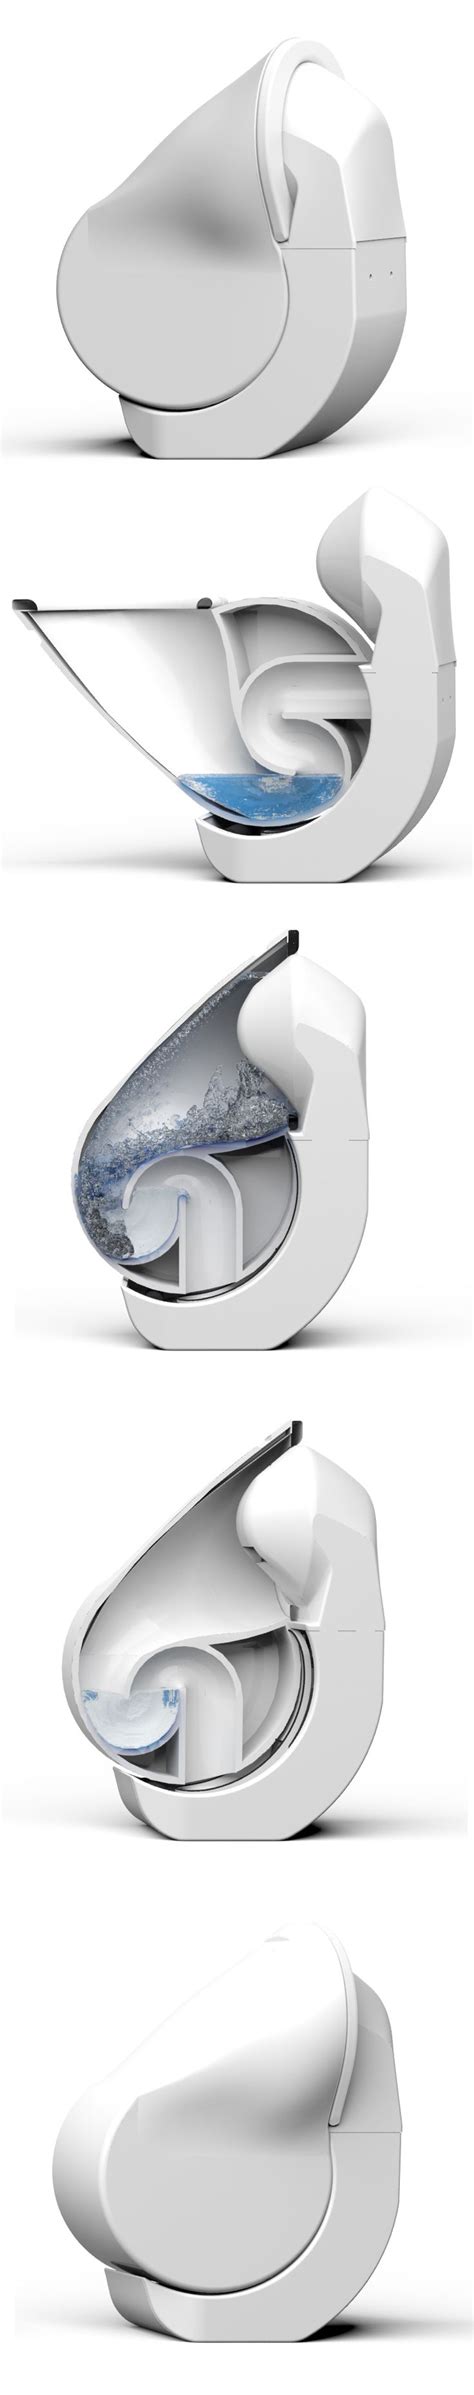 Iota Folding Toilet Reduces Its Size And Water Consumption Innovation